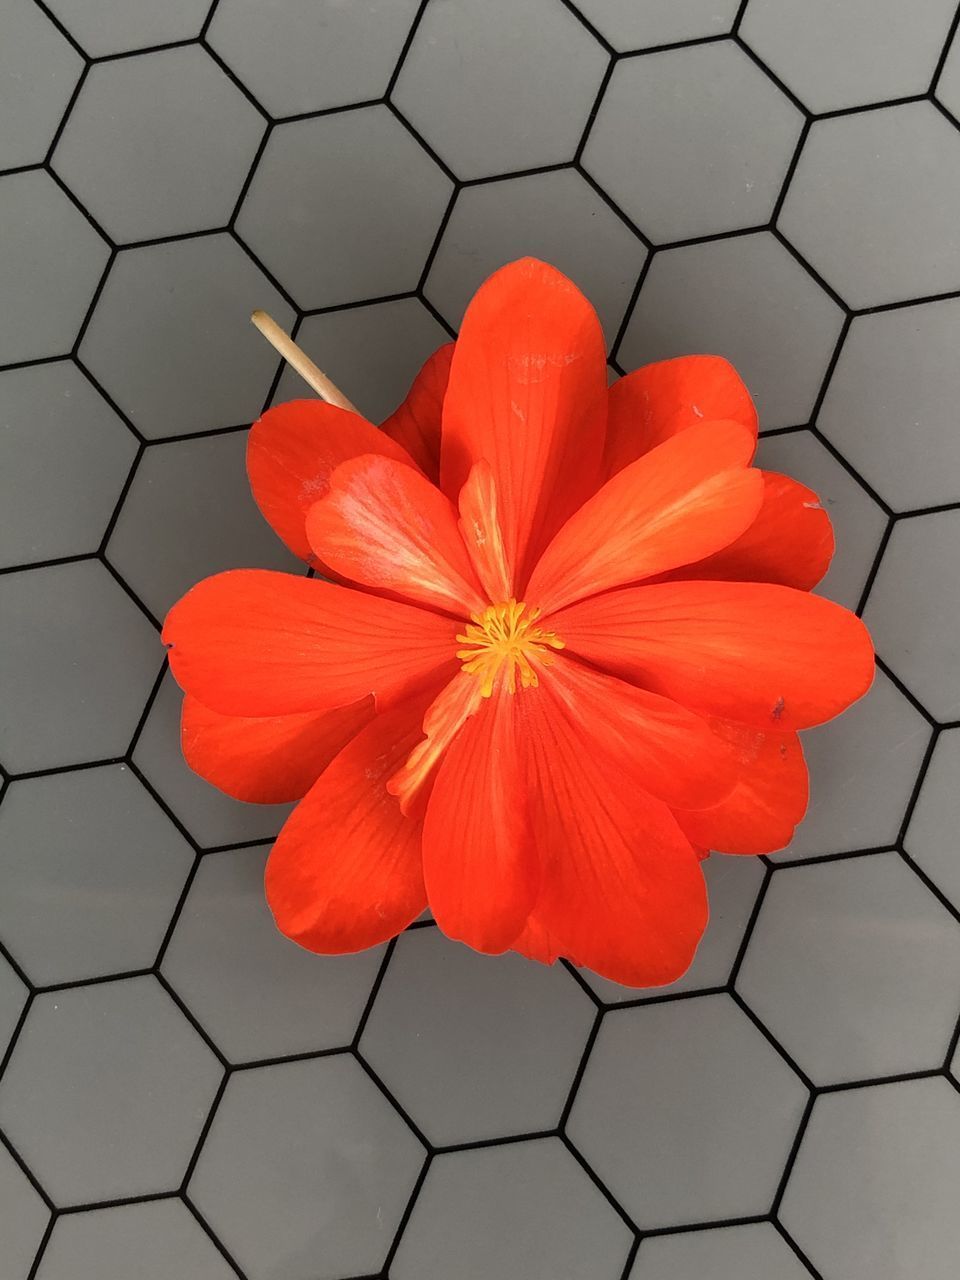 HIGH ANGLE VIEW OF ORANGE ROSE ON FLOOR